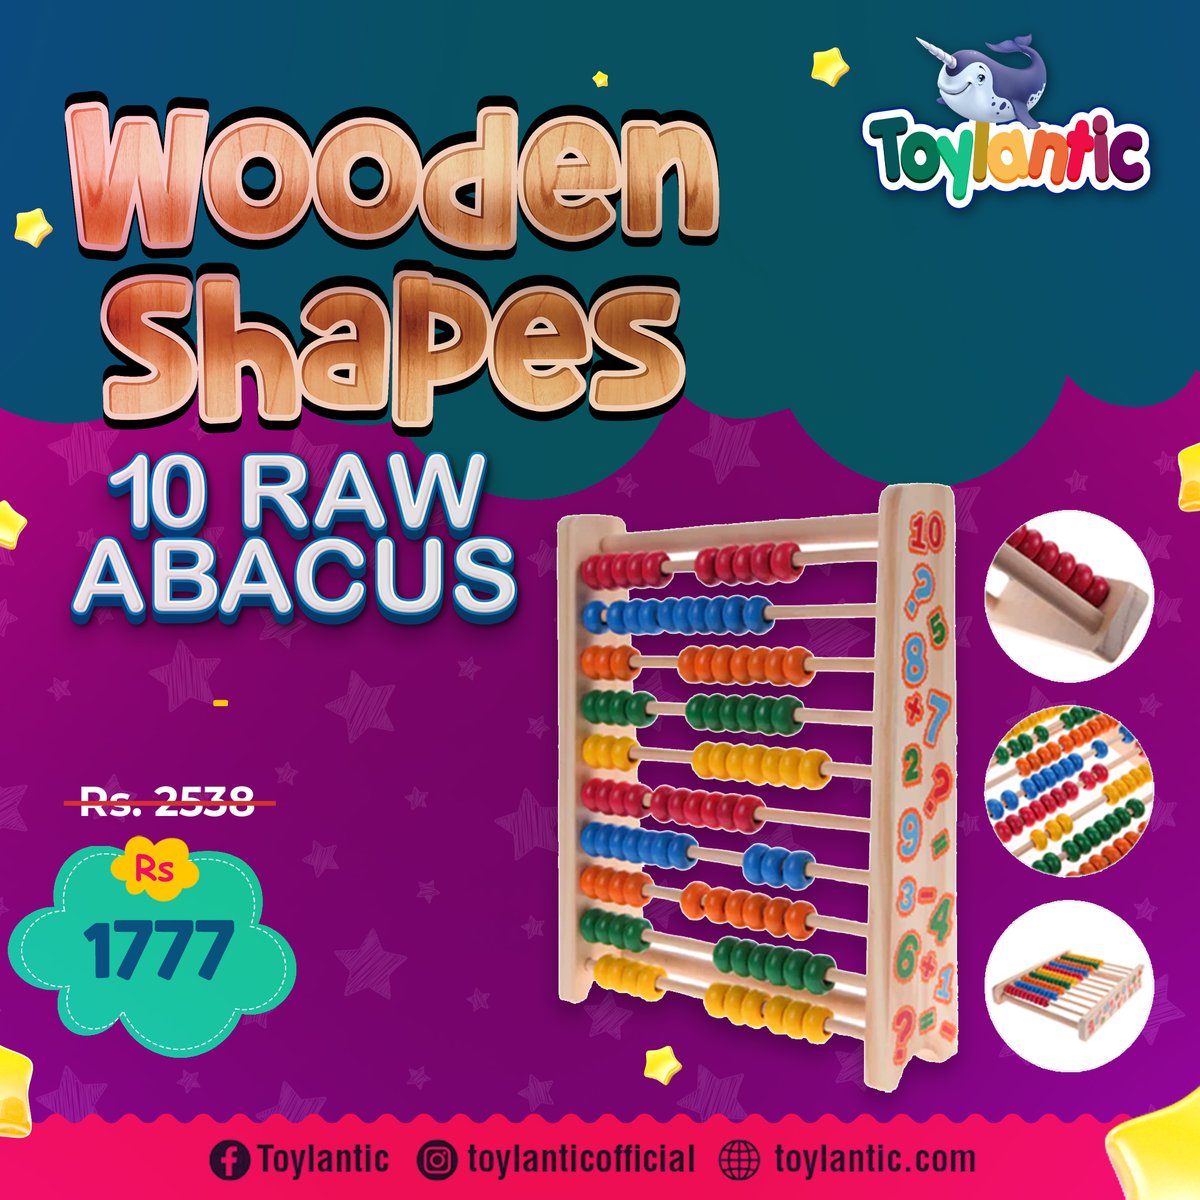 Abacus is known to improve the mathematical skills
Make your child learn through toys..!
Explore more educational toys:
toylantic.com/.../toys-by-ca…...
0334 0008697
#woodenshapes #woodentoys #educationaltoys #kids #creative #playtime #LearnWithPassion #childgrowth #toys #toylantic